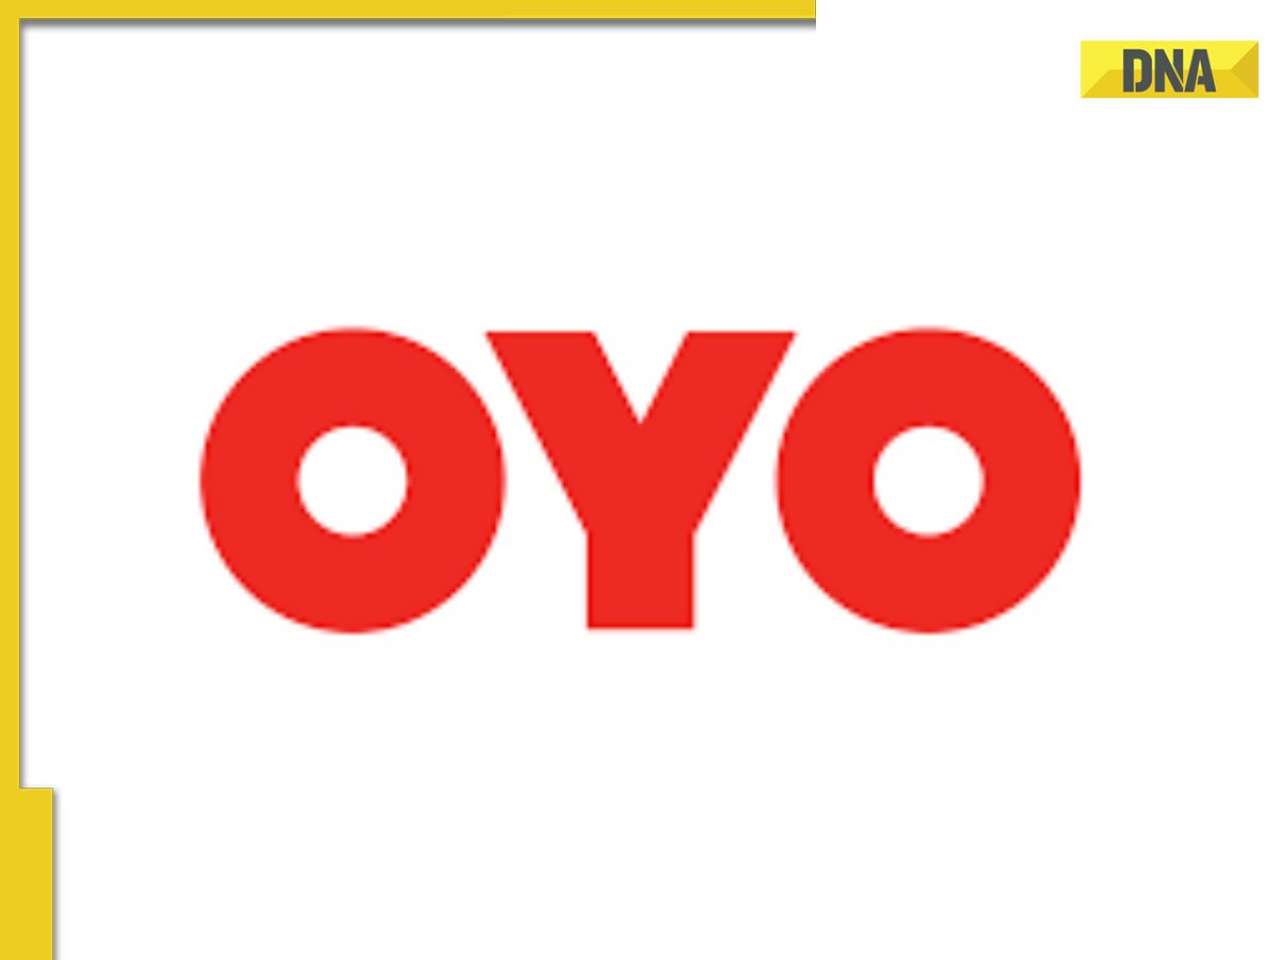 Oyo raising up to Rs 10440000000 in fresh funding, seeks valuation of Rs 20883 crore